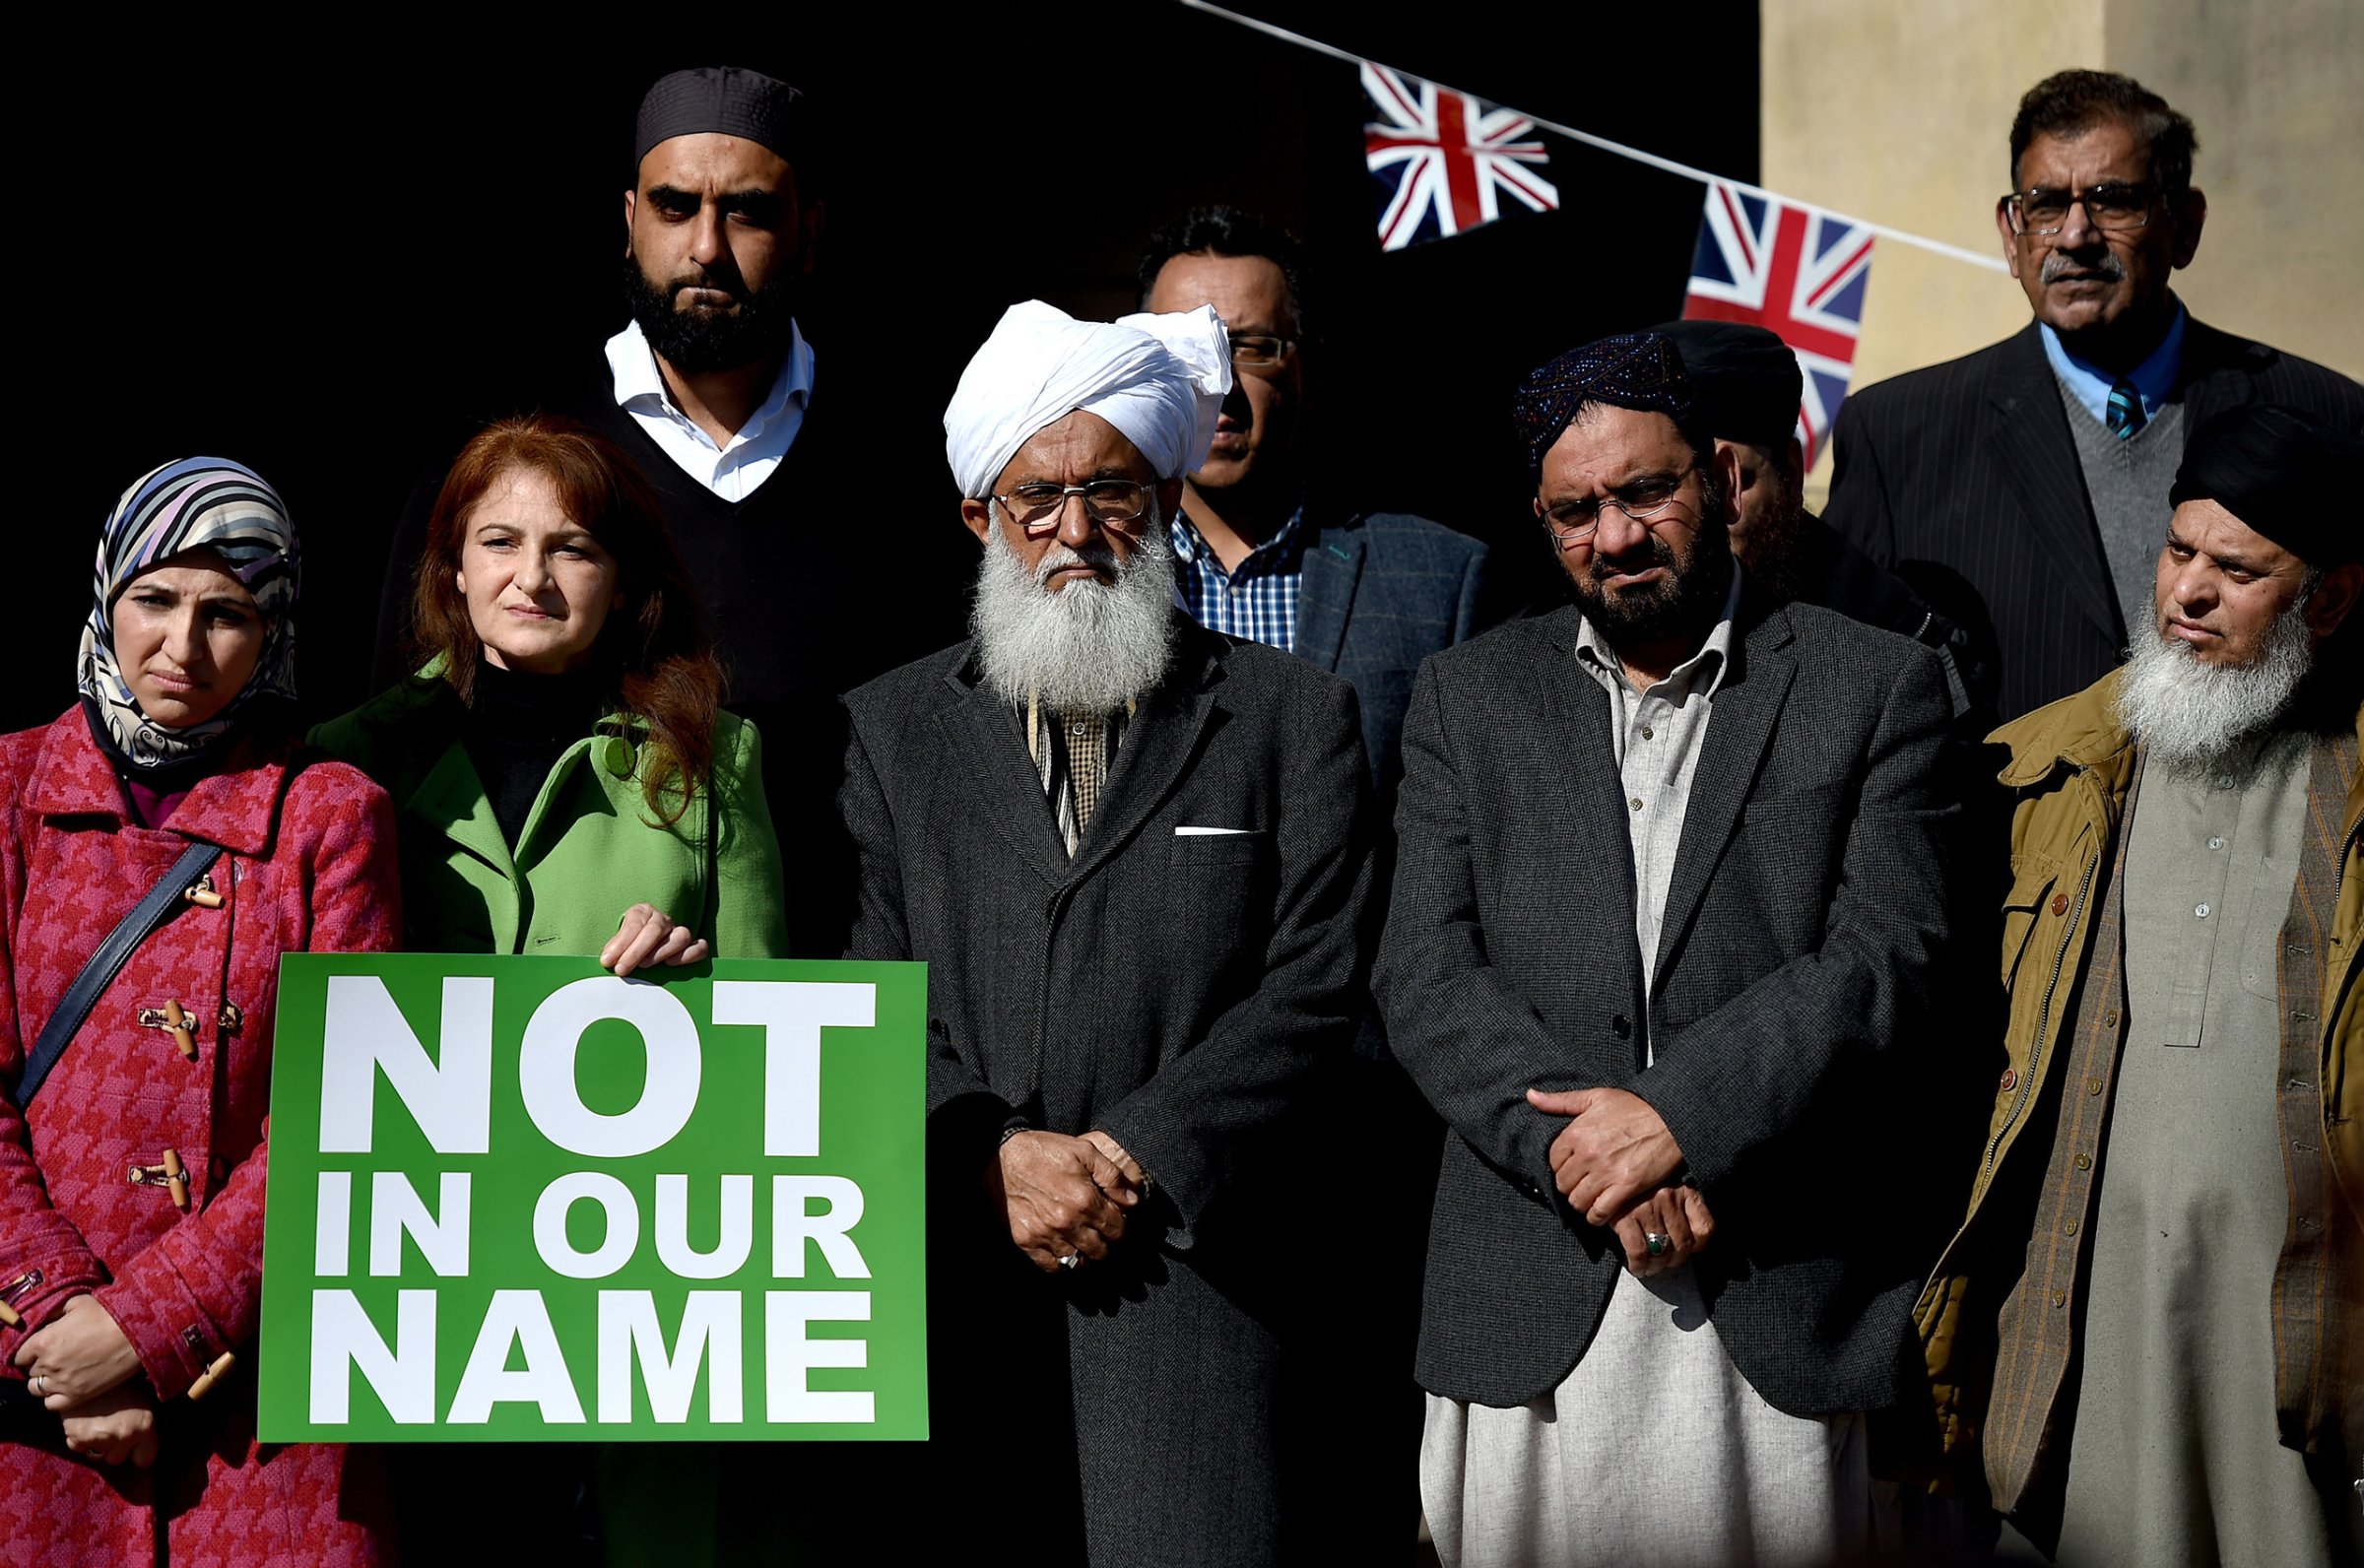 People take part in a #NotInOurName public rally against terrorism organized by members of the Muslim community in Victoria Square, Birmingham, on March 25, 2017.